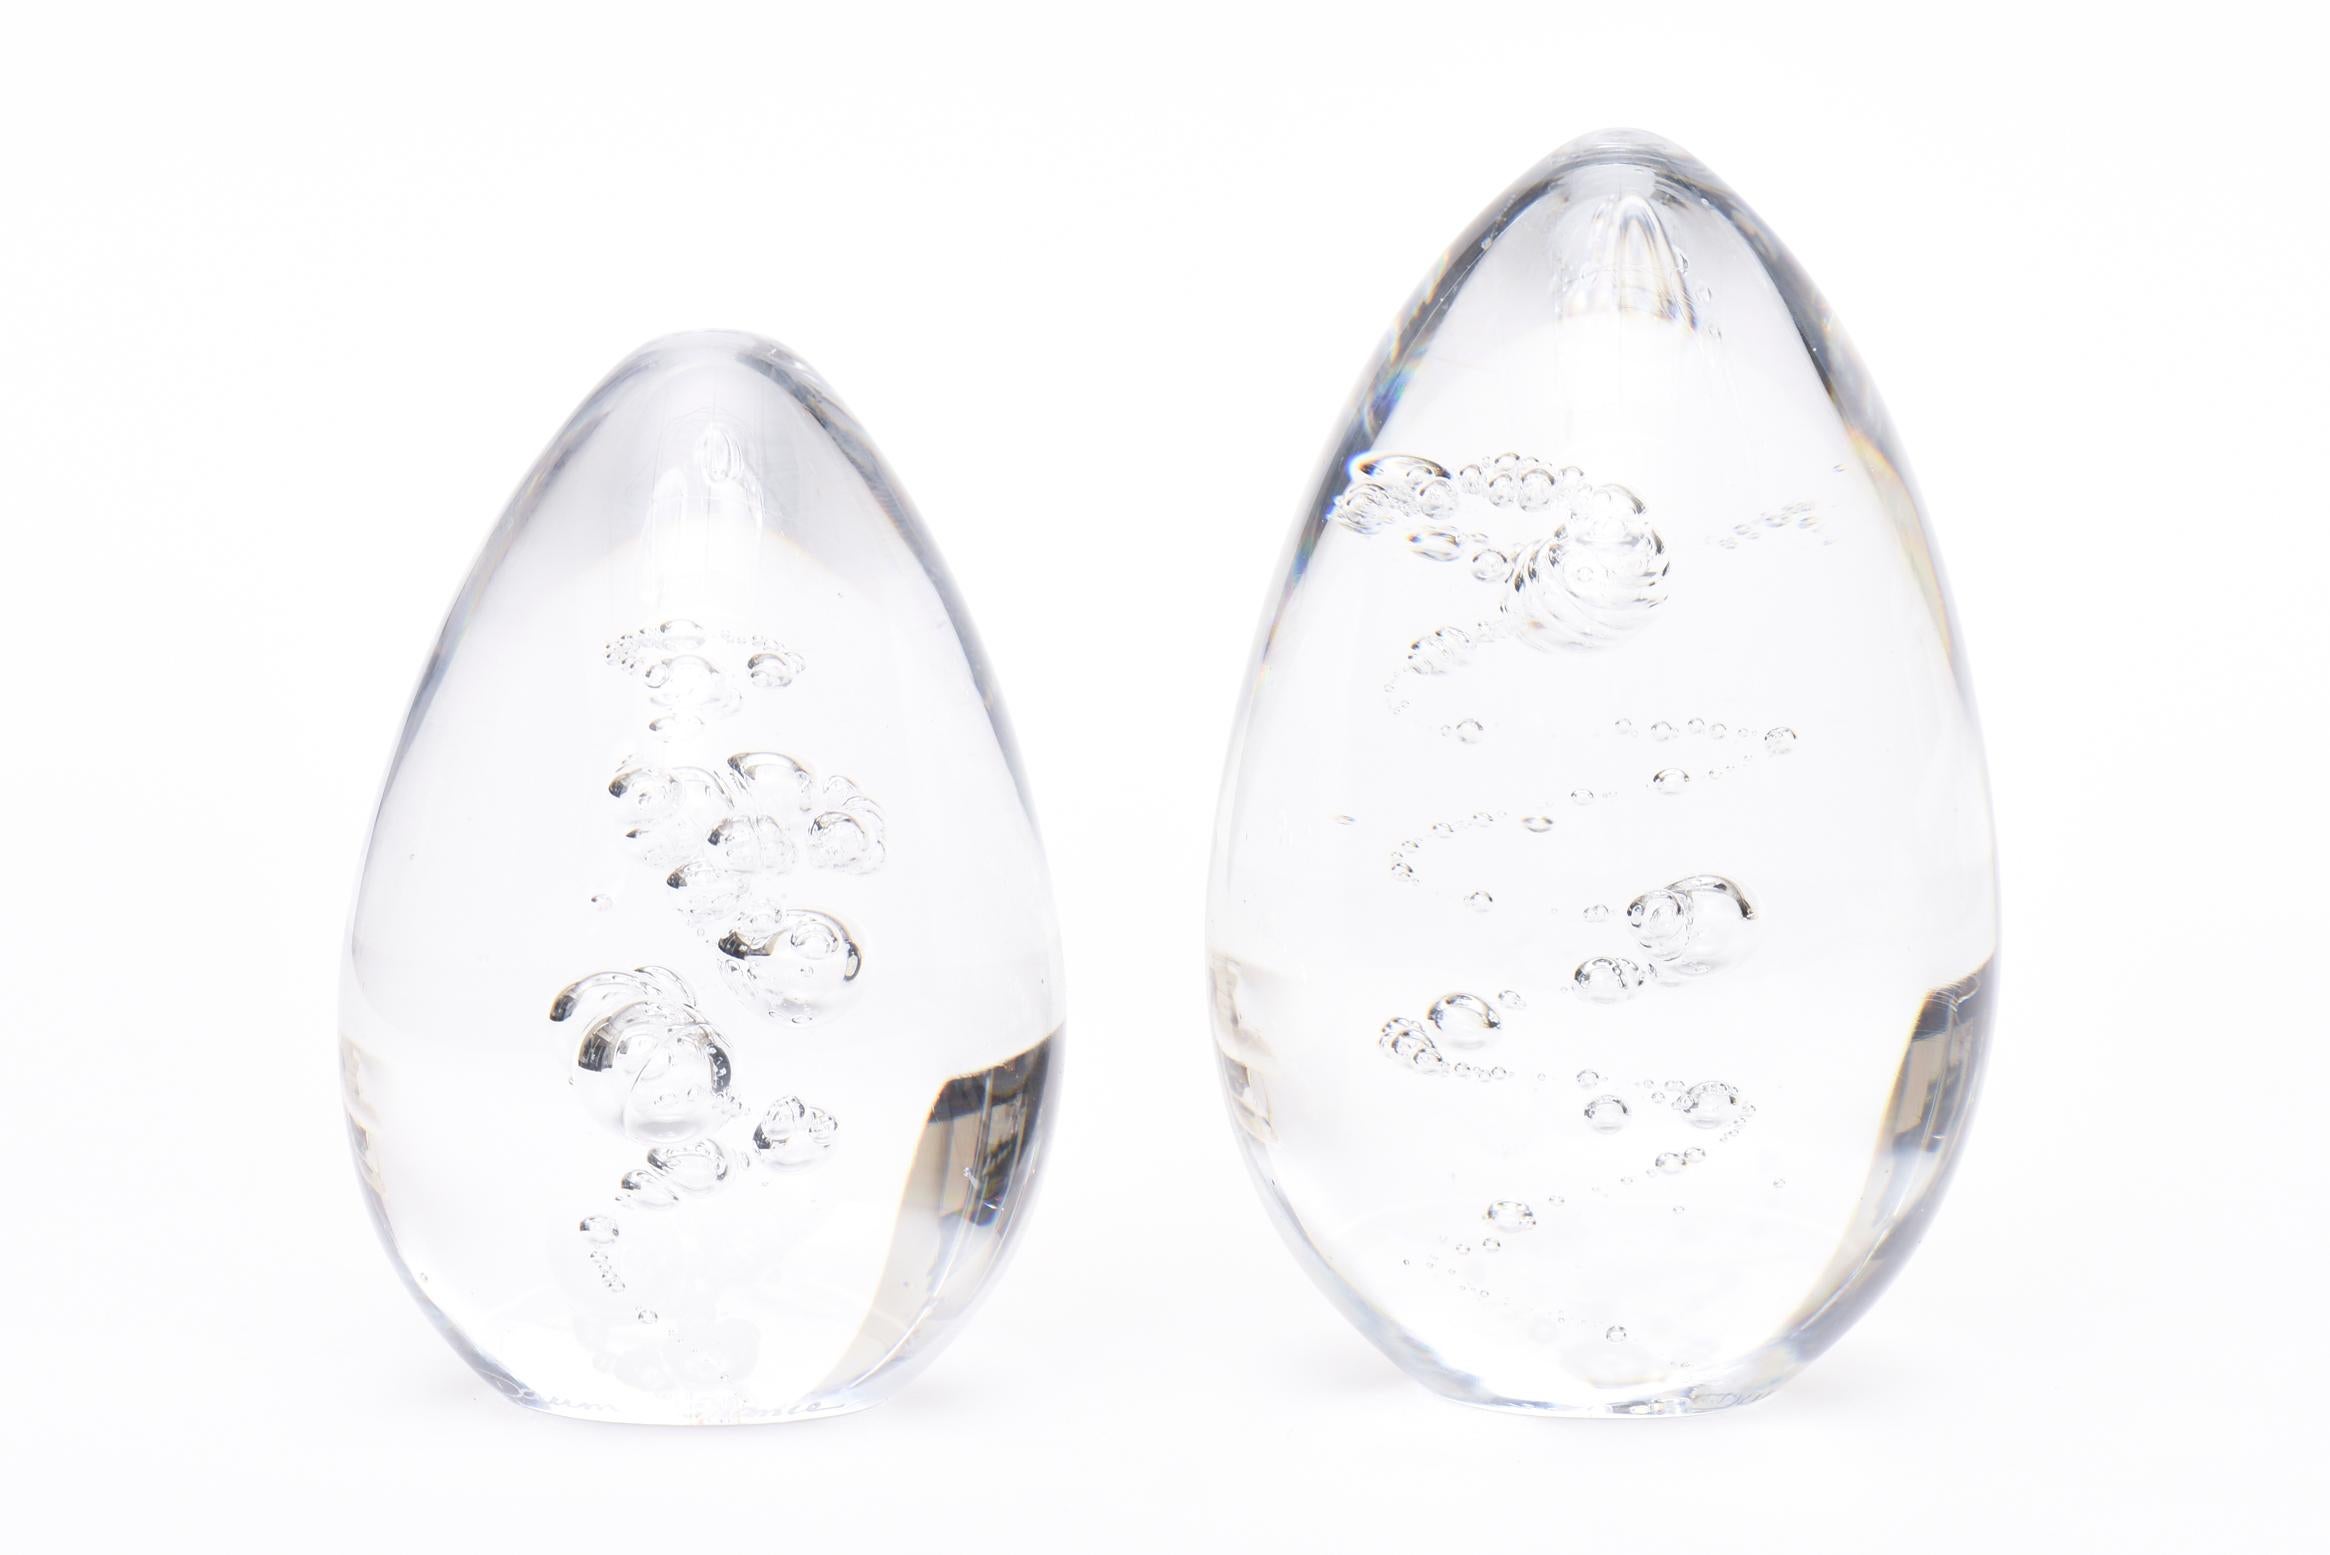 This pair of vintage French Daum signed crystal clear glass paperweights have bubble inclusions inside that are of a sculptural form. They are signed Daum France. They are two different sizes and make a great desk accessory the largest size is